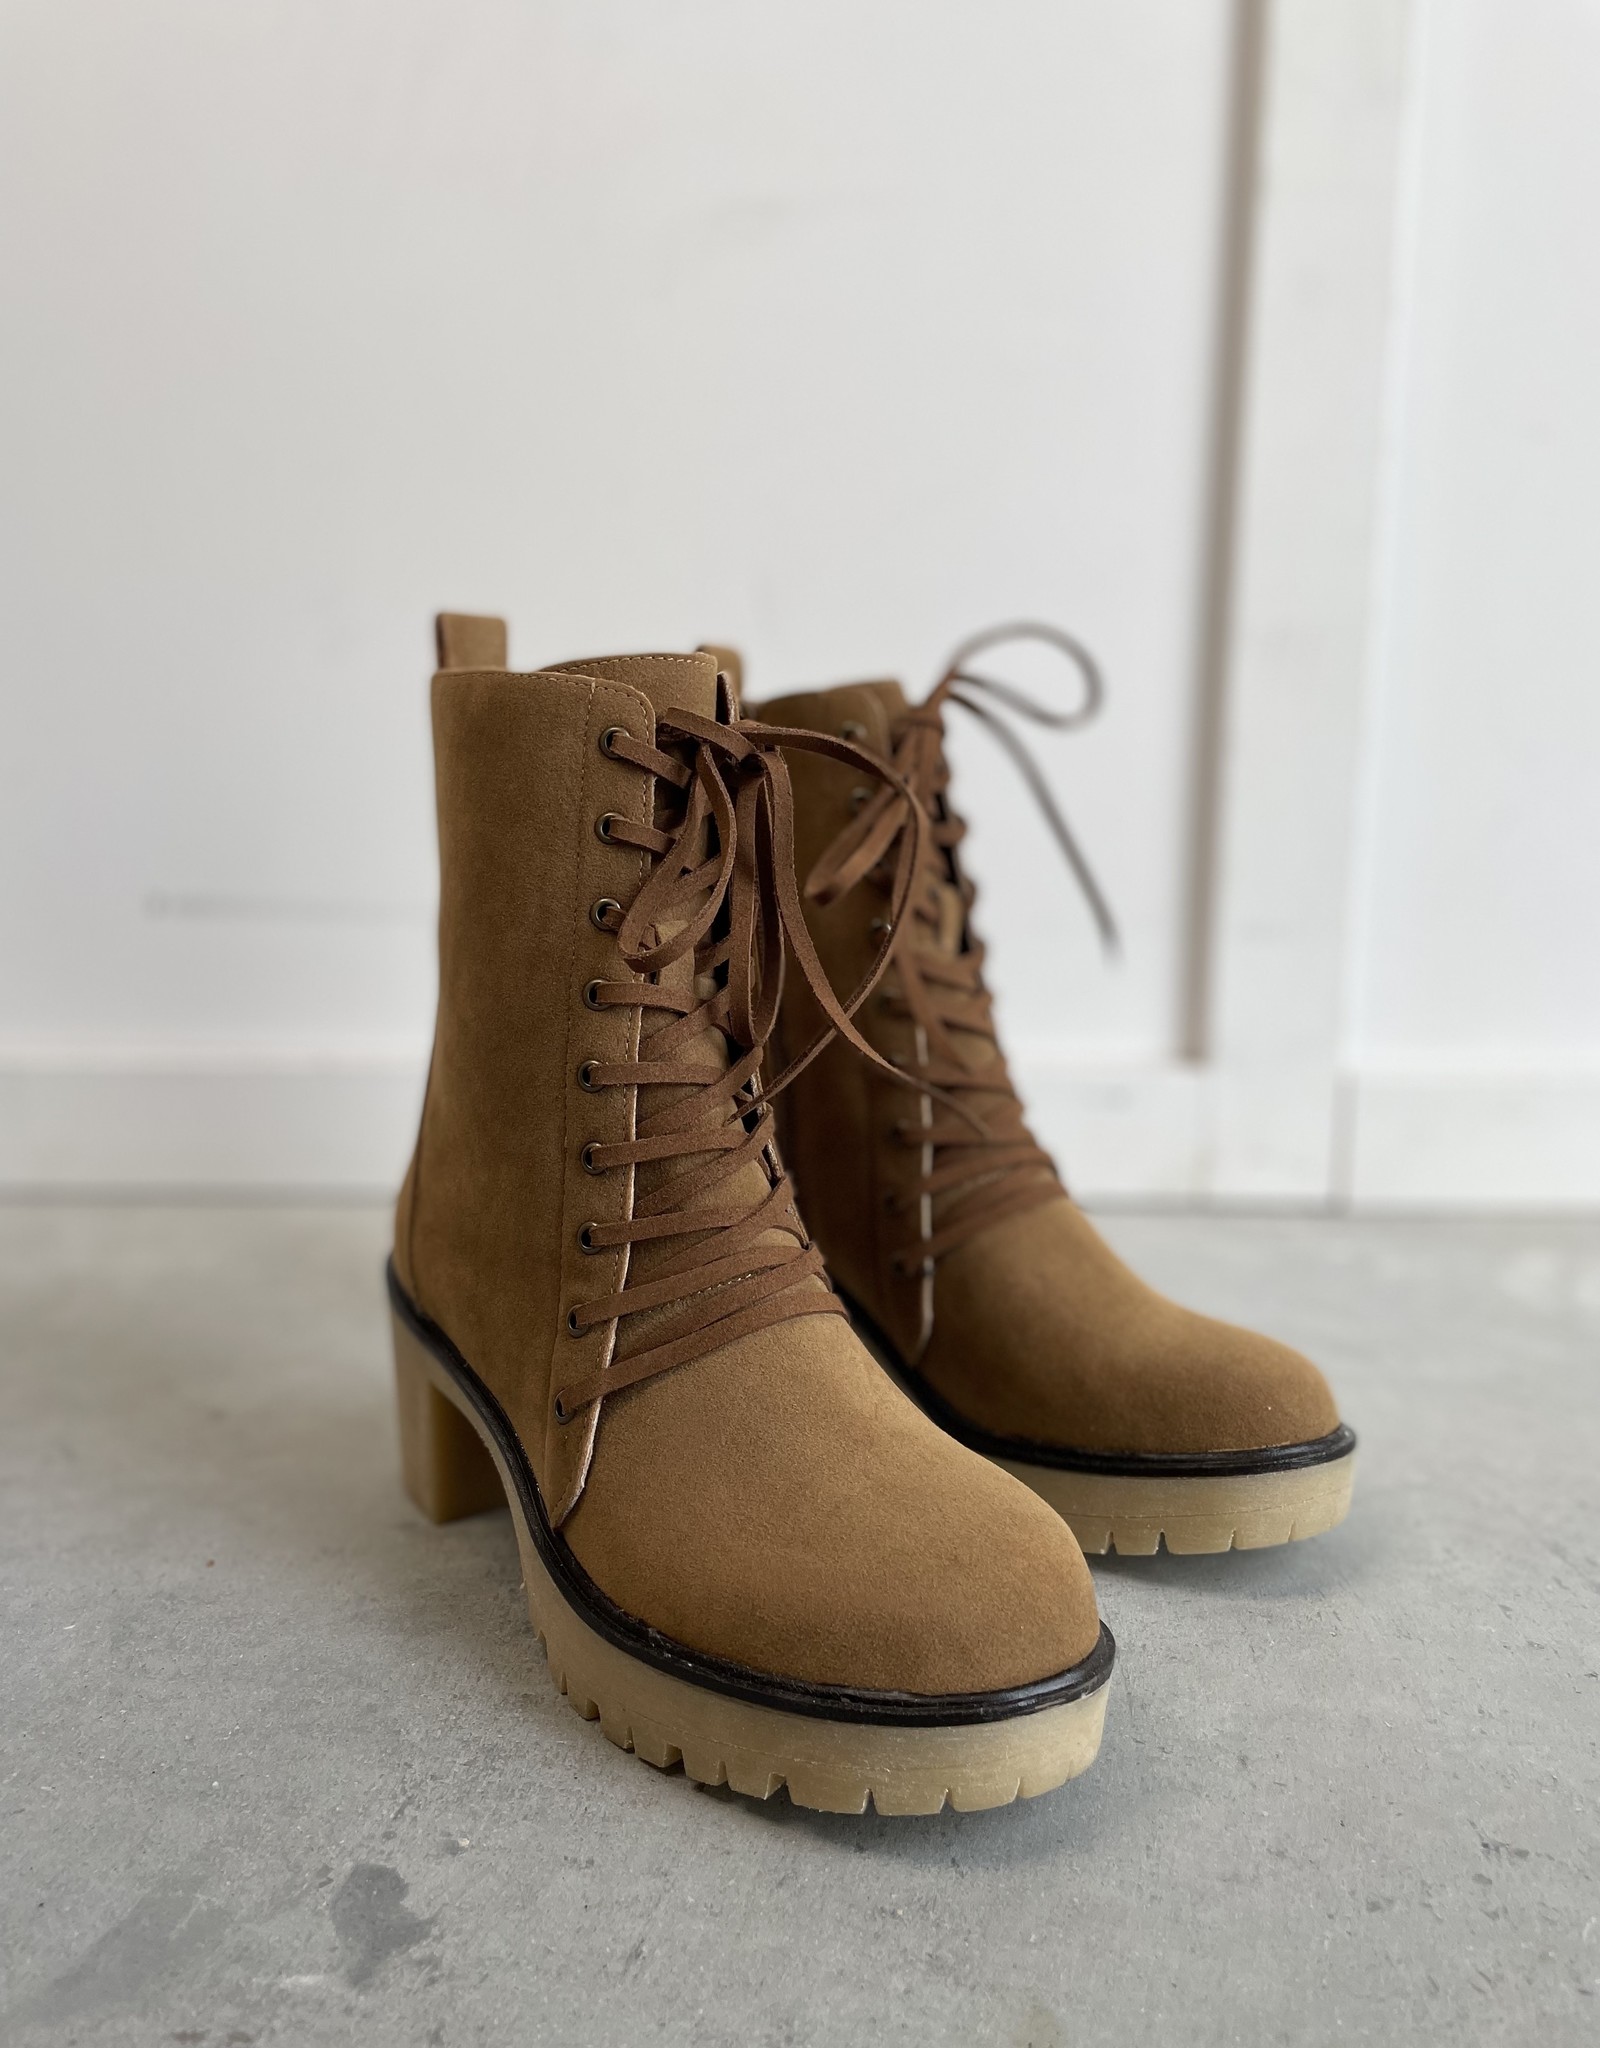 HUSH JAMIE lace up boot